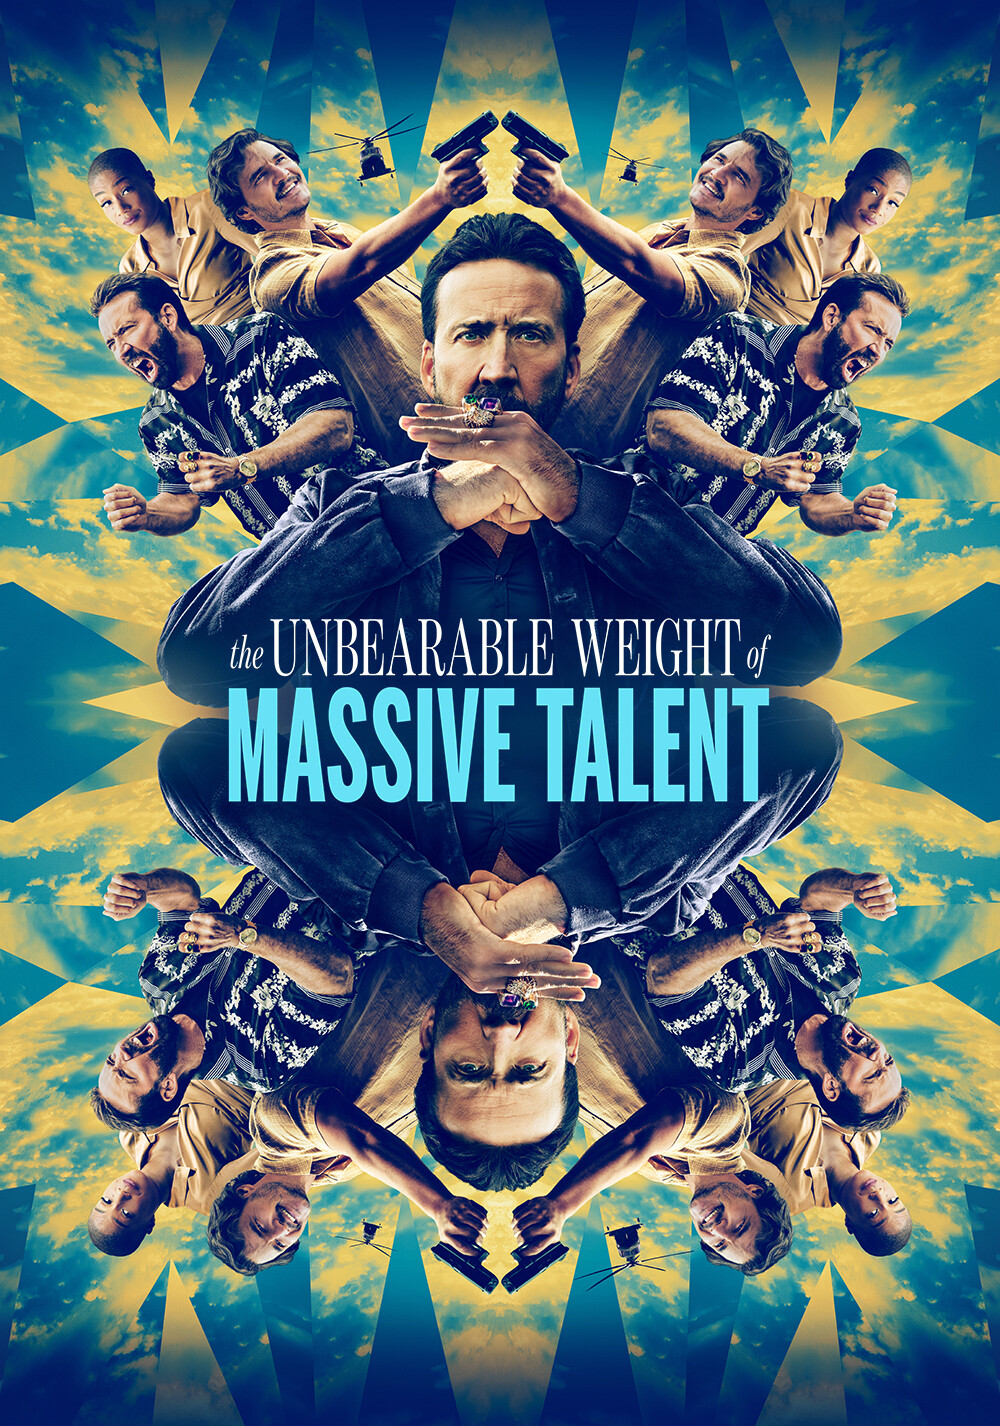 The Unbearable Weight of Massive Talent 2022 2160p BluRay REMUX HEVC DTS-HD MA TrueHD 7 1 Atmos-FGT